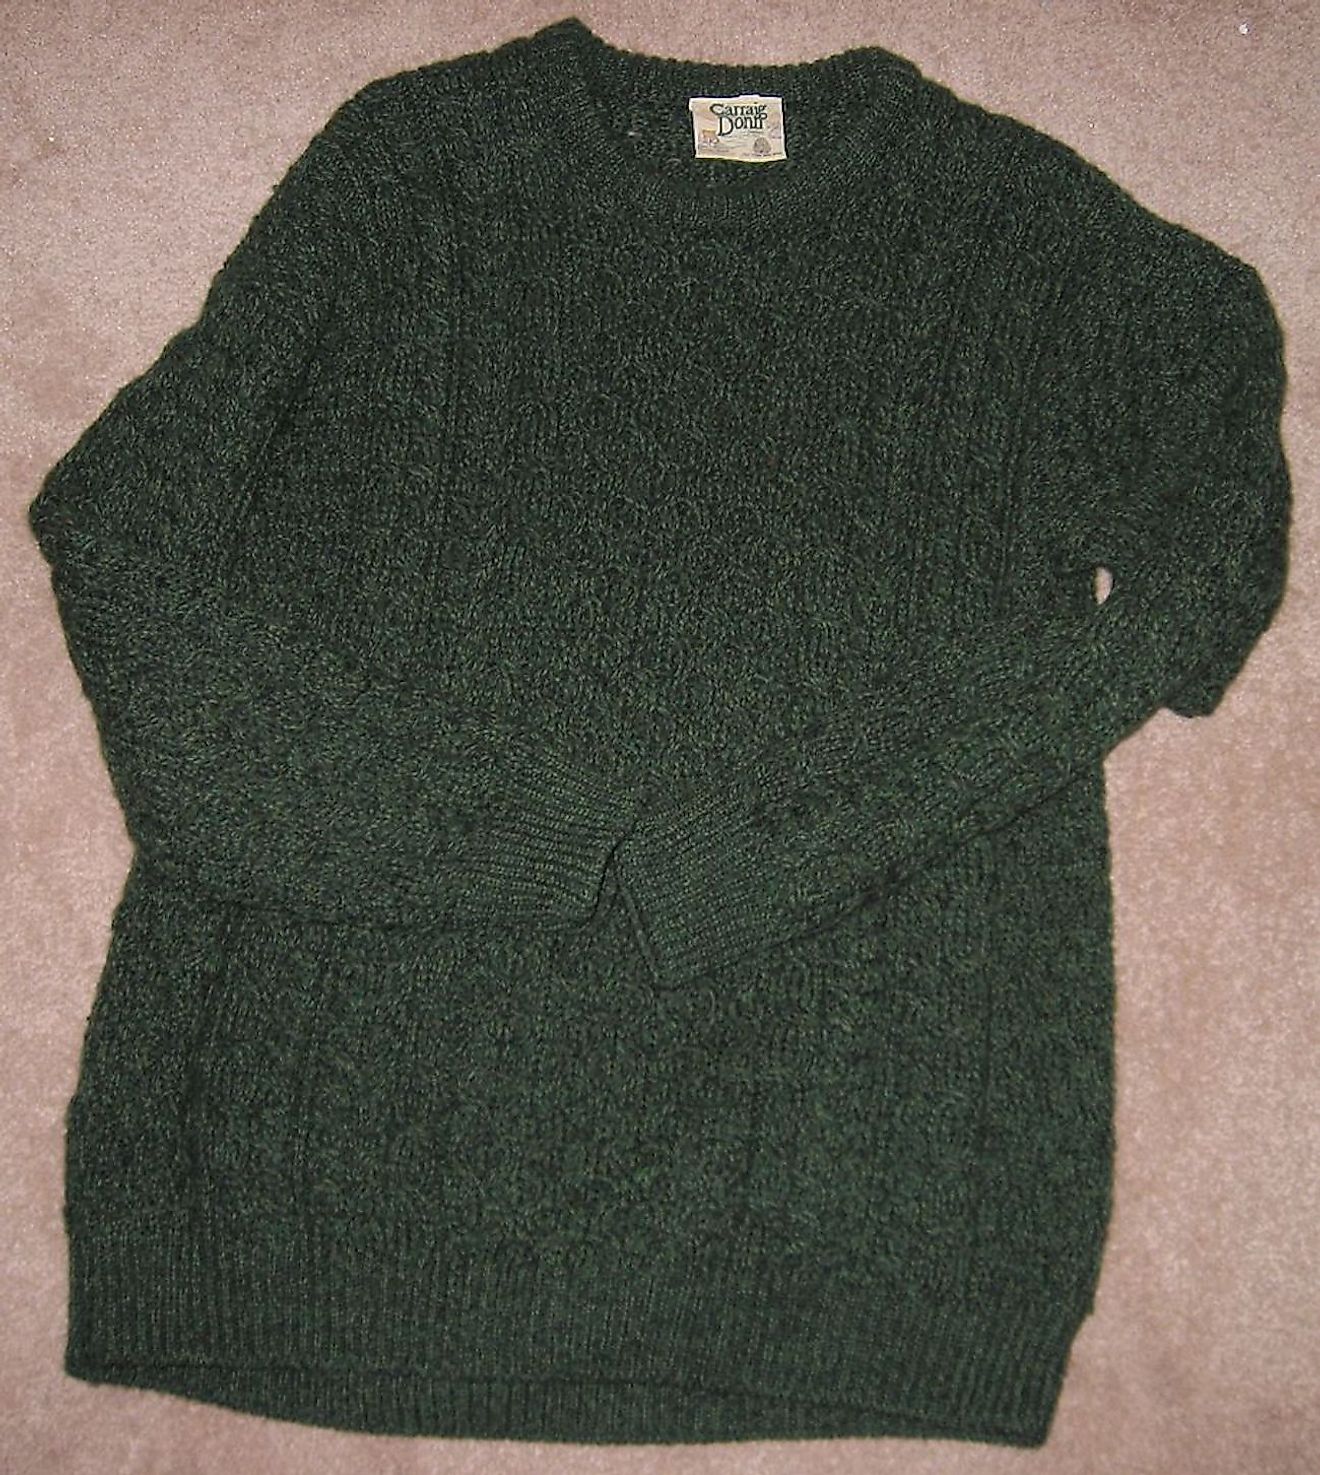 Aran Sweater, green, made by "Carraig Donn", Ireland. Image credit: User:Smee/Public domain